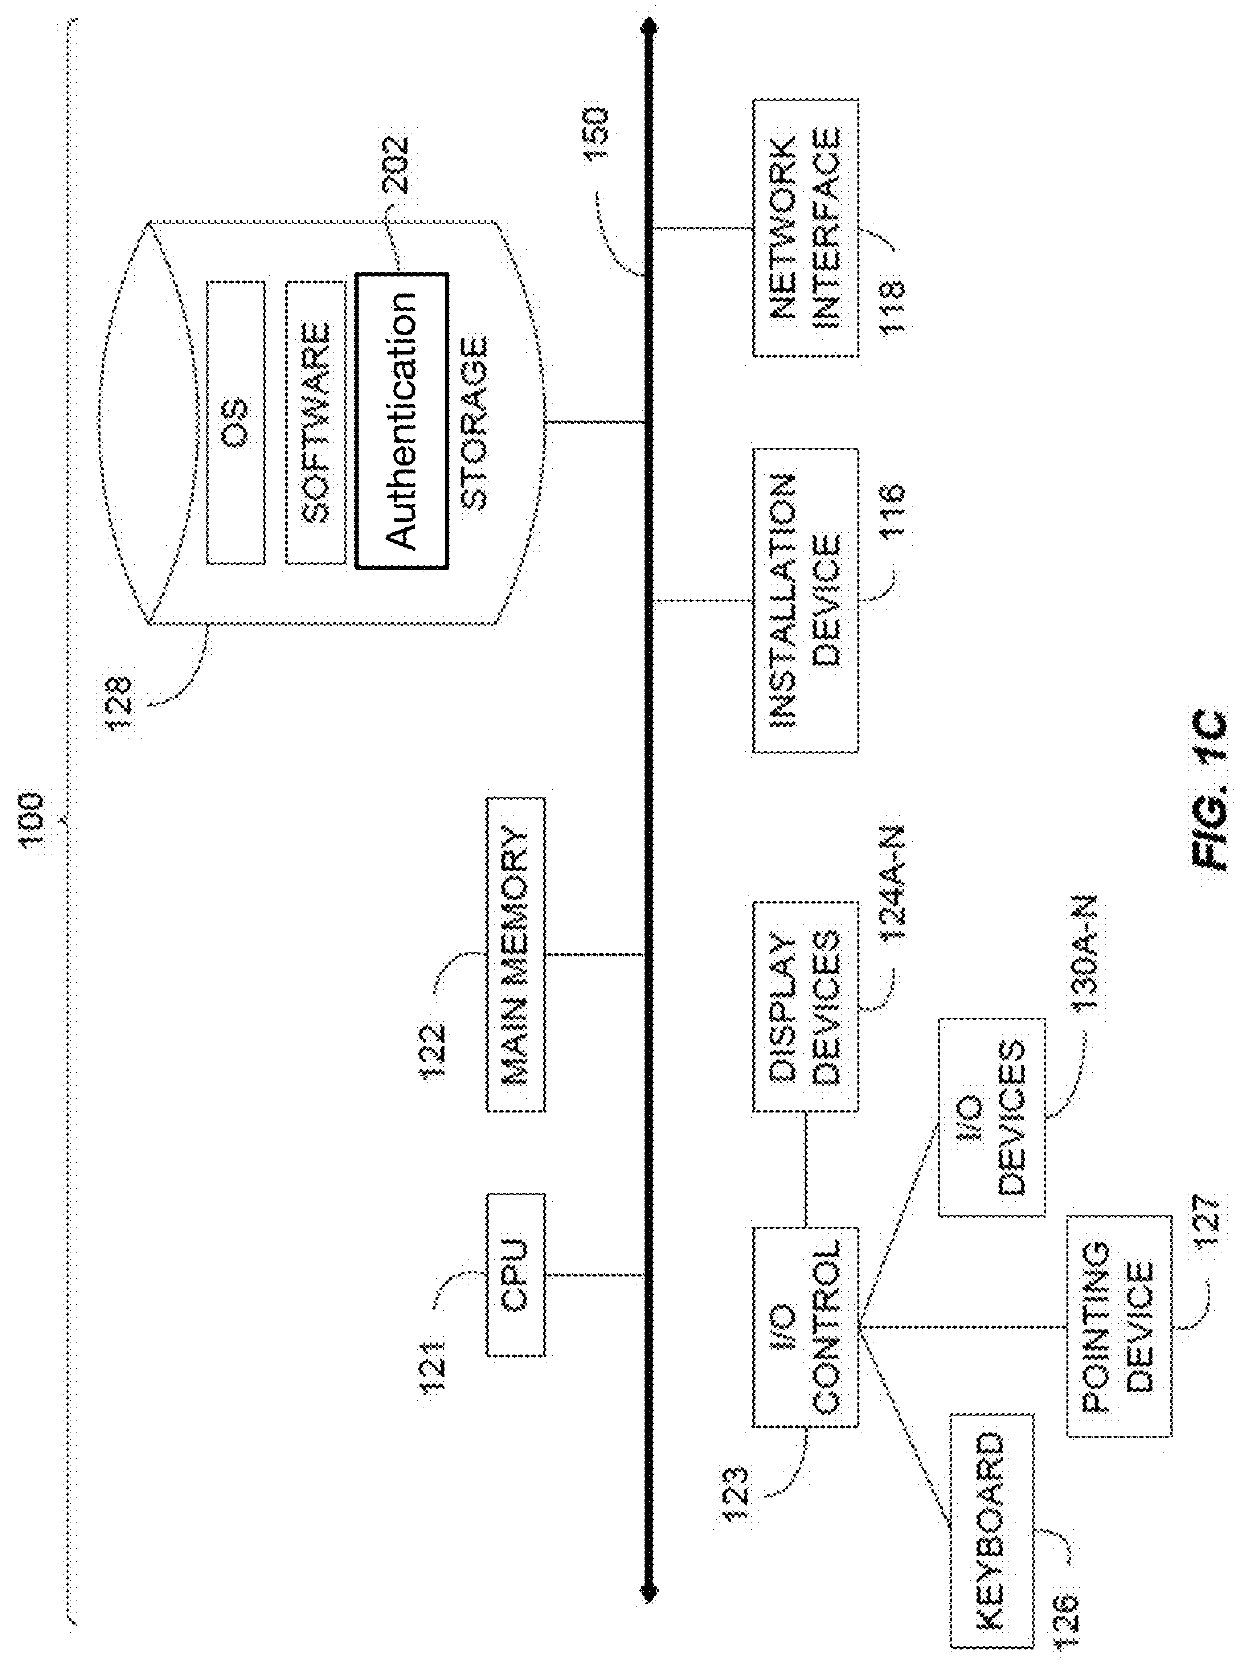 System and method for classification and authentication of identification documents using a machine learning based convolutional neural network